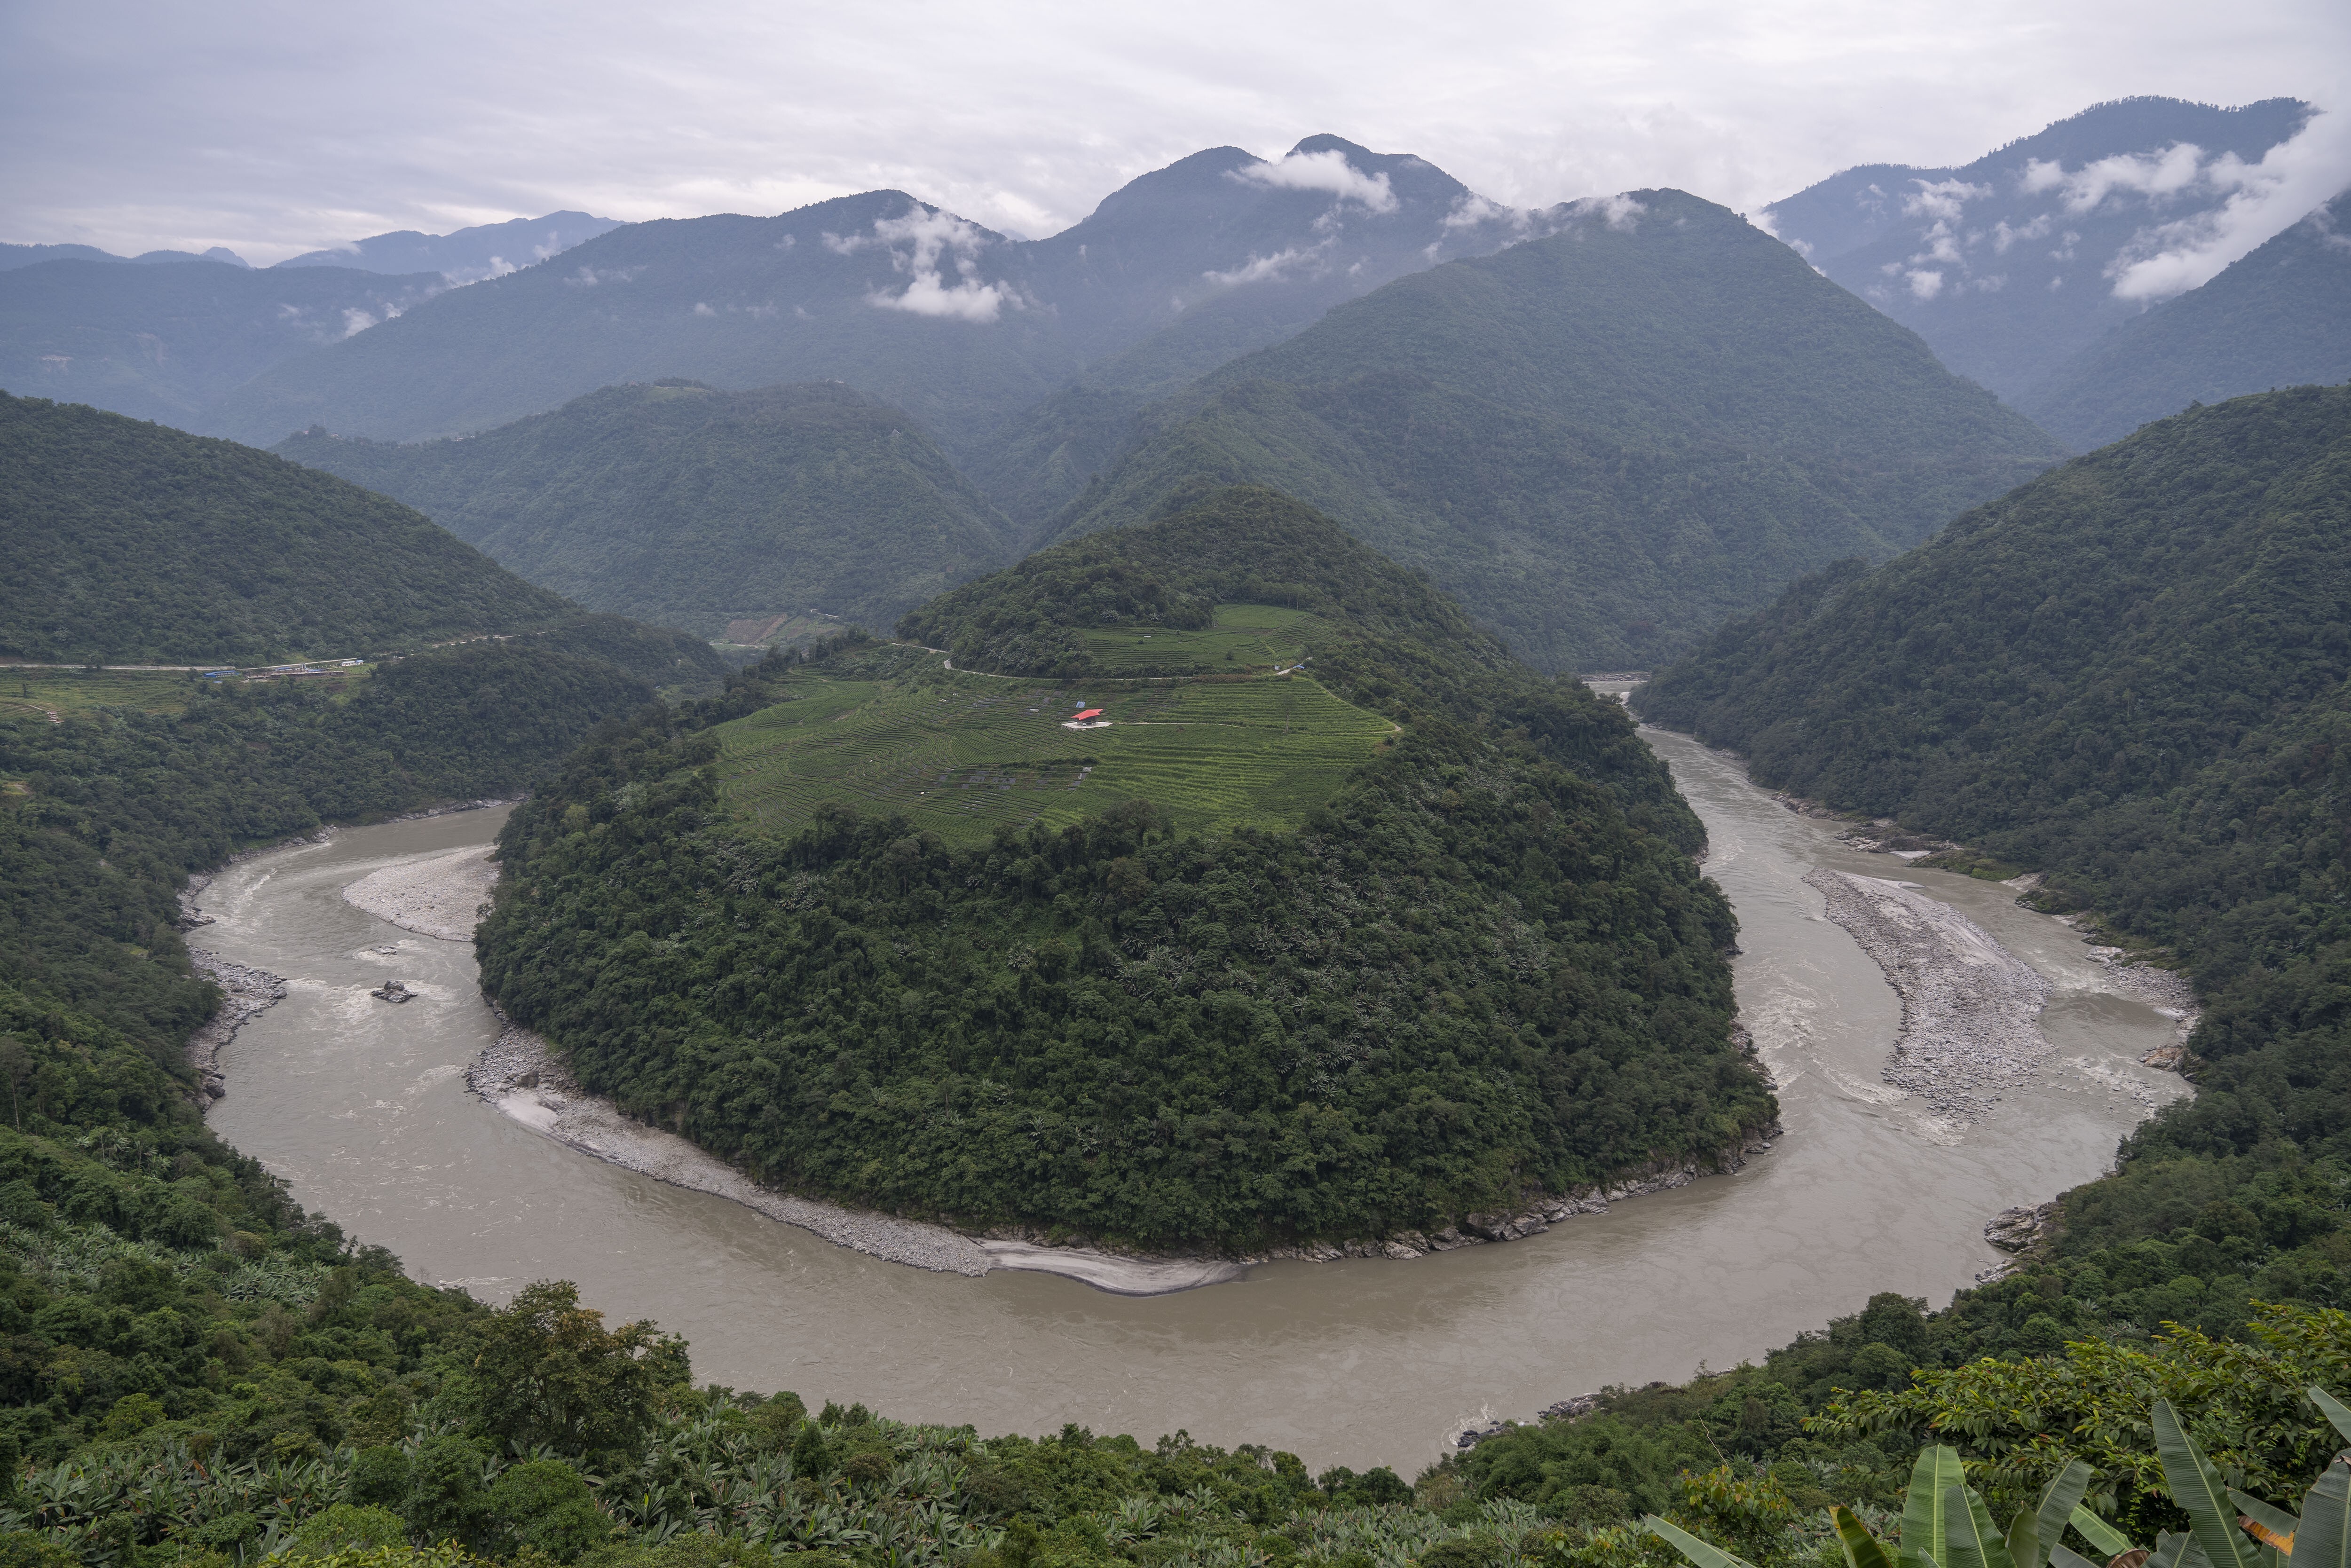 The Yarlung Tsangpo River flows through Tibet before entering India. China’s plans for a dam risk further inflaming tensions with its neighbour. Photo: Xinhua